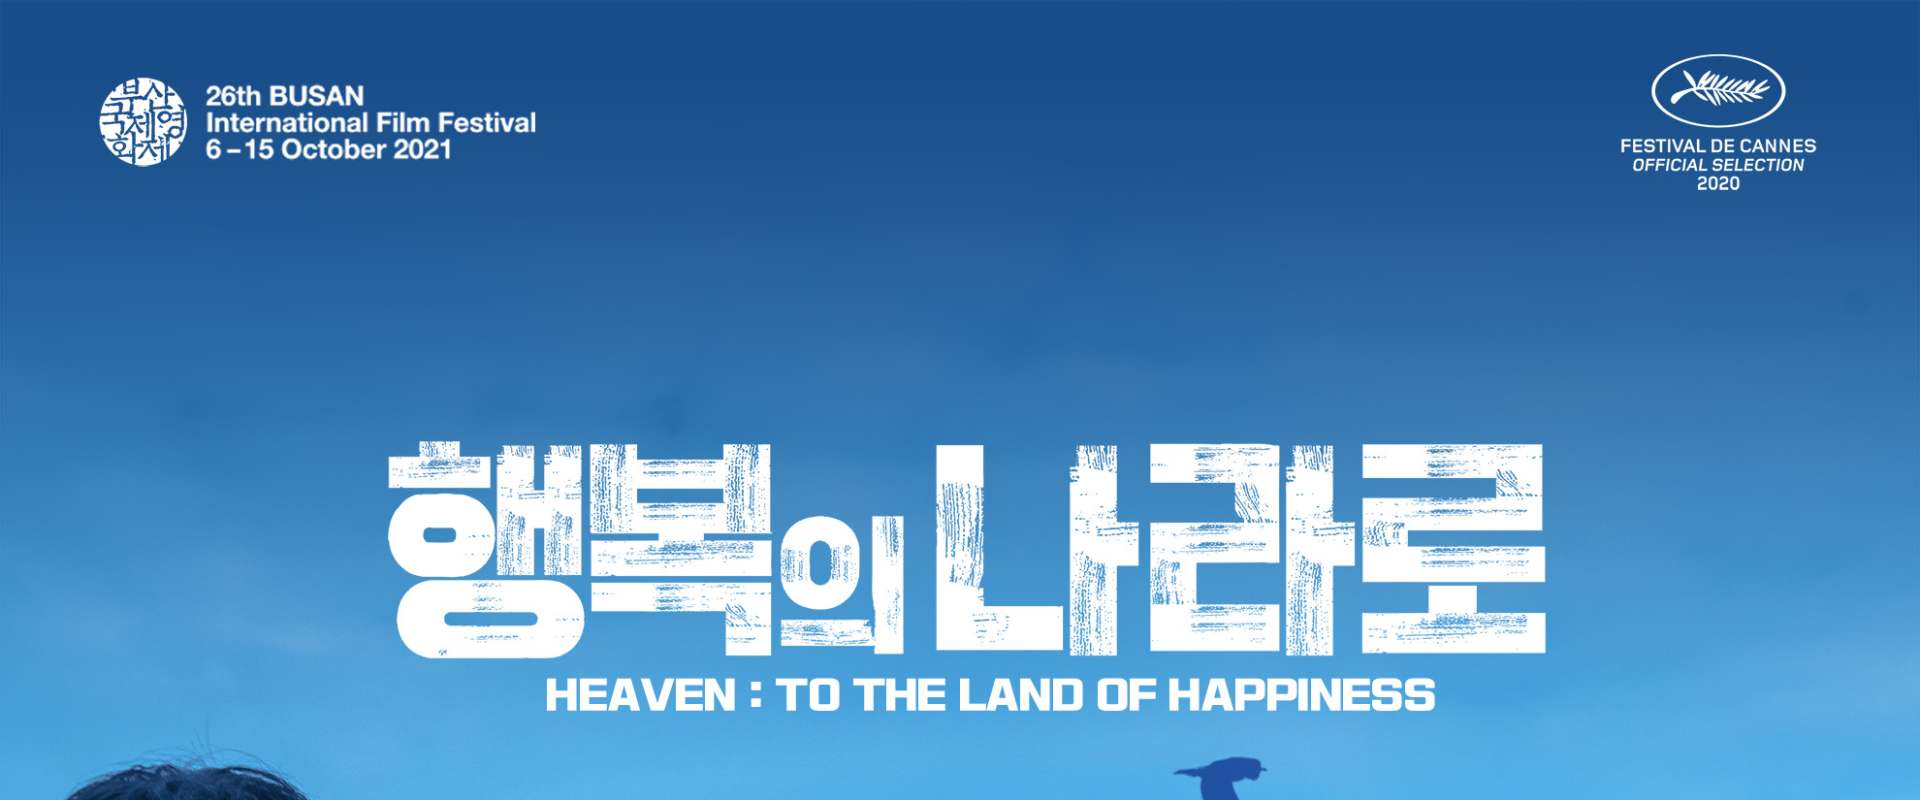 Heaven: To The Land of Happiness background 2